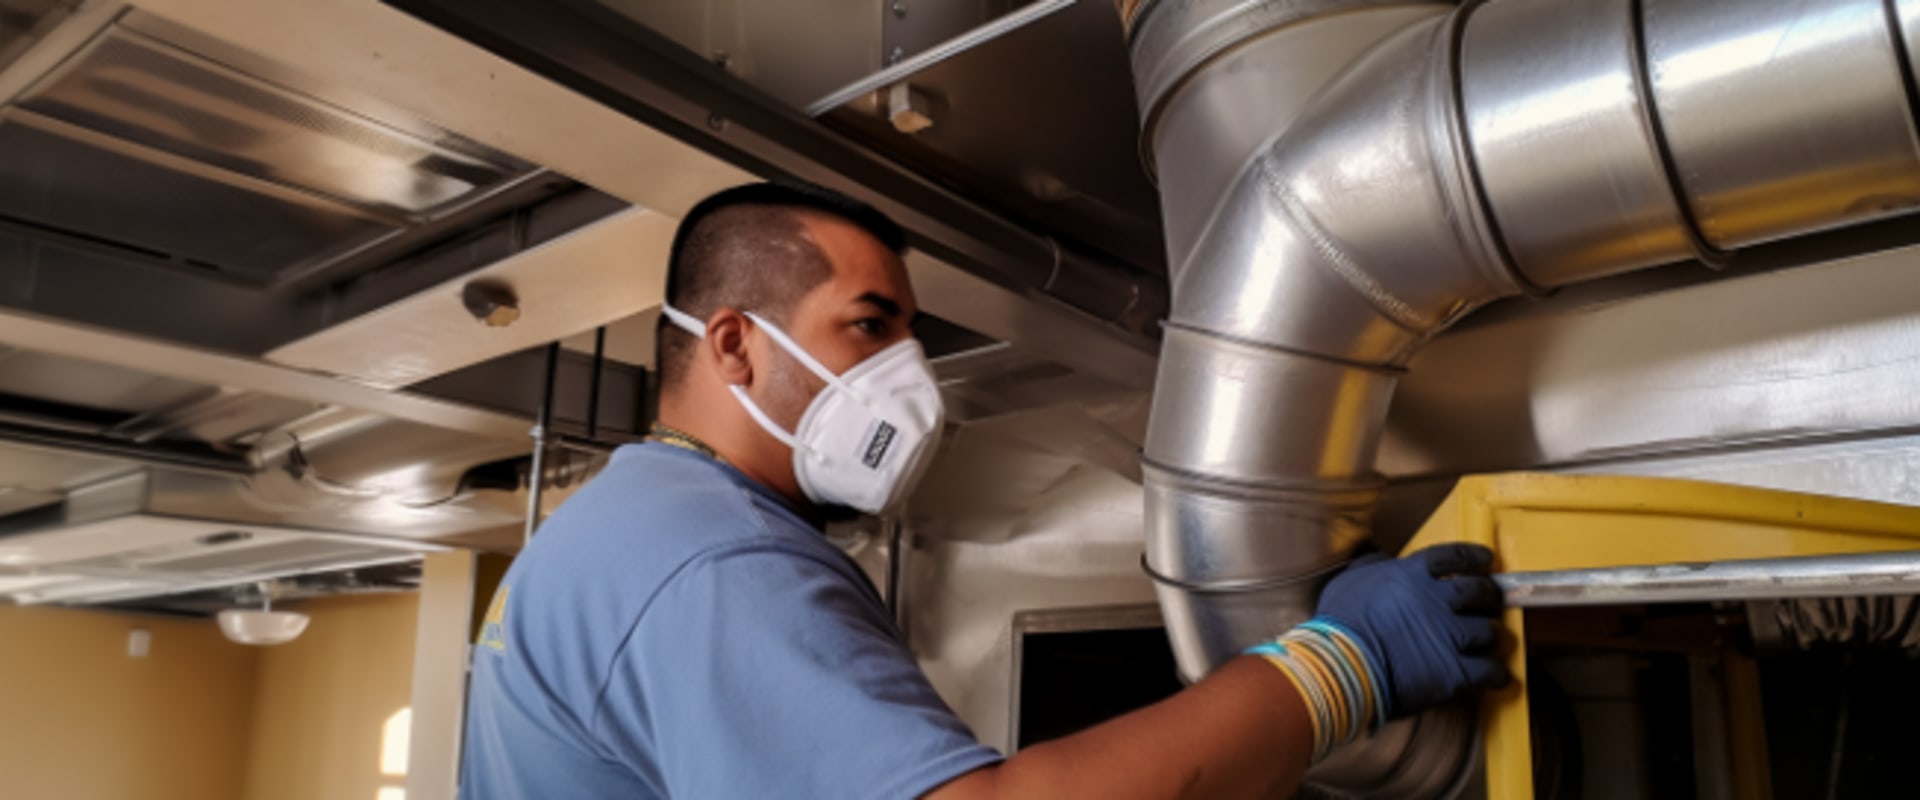 Importance of Air Duct Cleaning Service in Cutler Bay FL